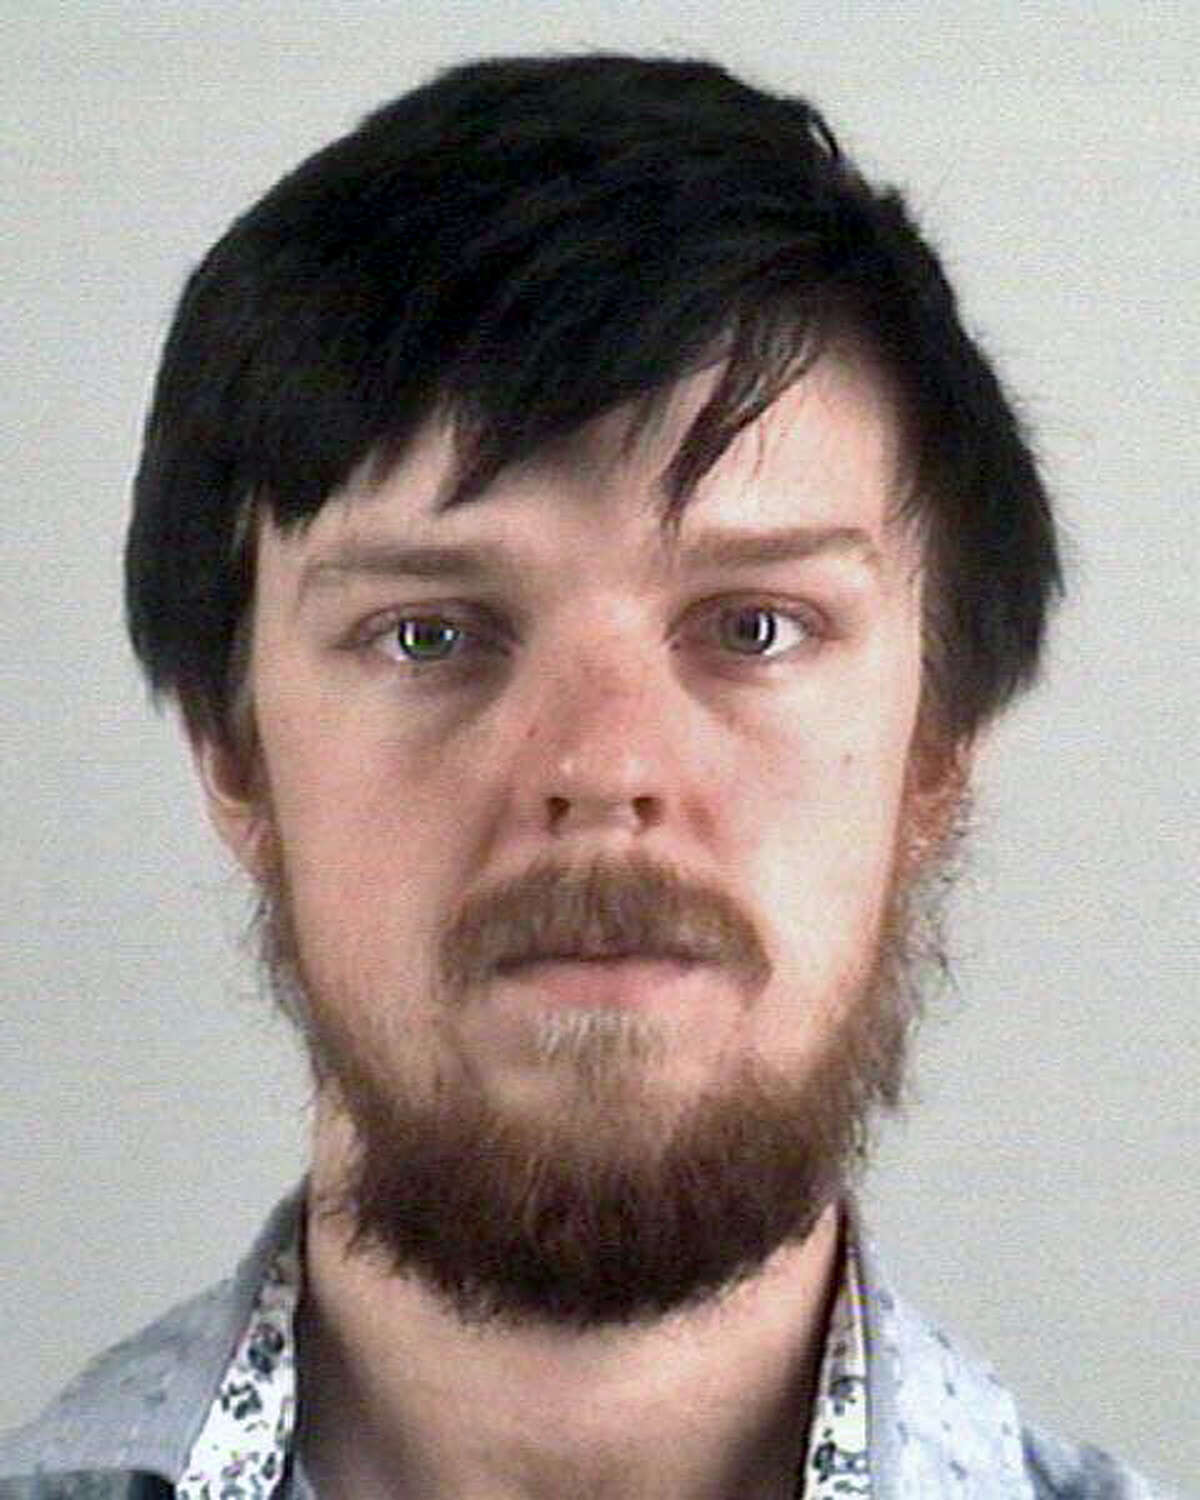 In this photo provided by the Tarrant County Sheriff's Department, Ethan Couch appears in a booking photo on February 5, 2016, in Fort Worth, Texas. The Texas teenager who used an "affluenza" defense in a fatal drunken-driving wreck was transferred to an adult jail on Friday, a week after a judge initially refused to do so.